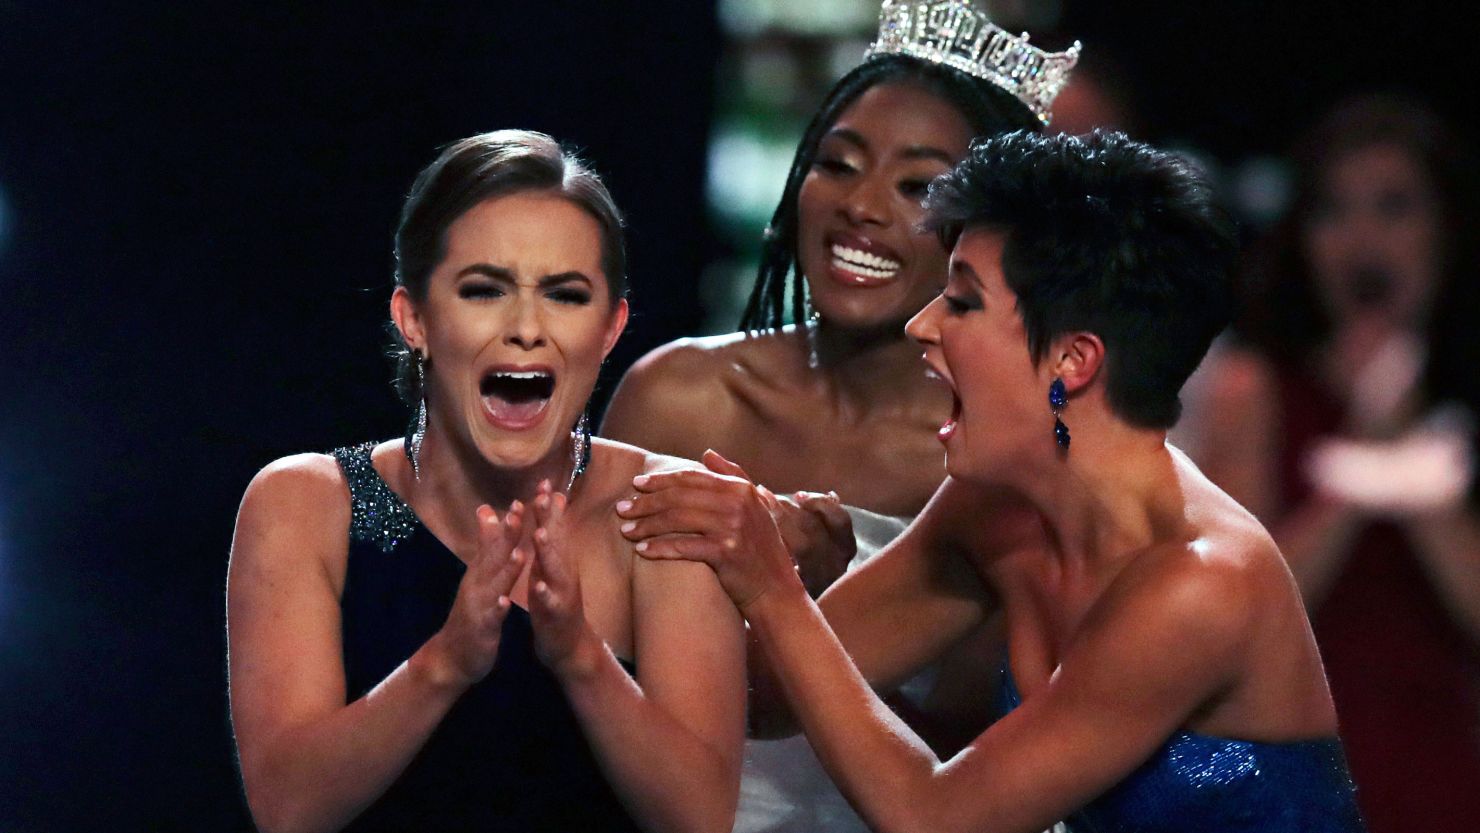 Camille Schrier, of Virginia, left, reacts after winning the Miss America competition while runner-up Miss Georgia Victoria Hill  2019 and Miss. America Nia Franklin congratulate her.